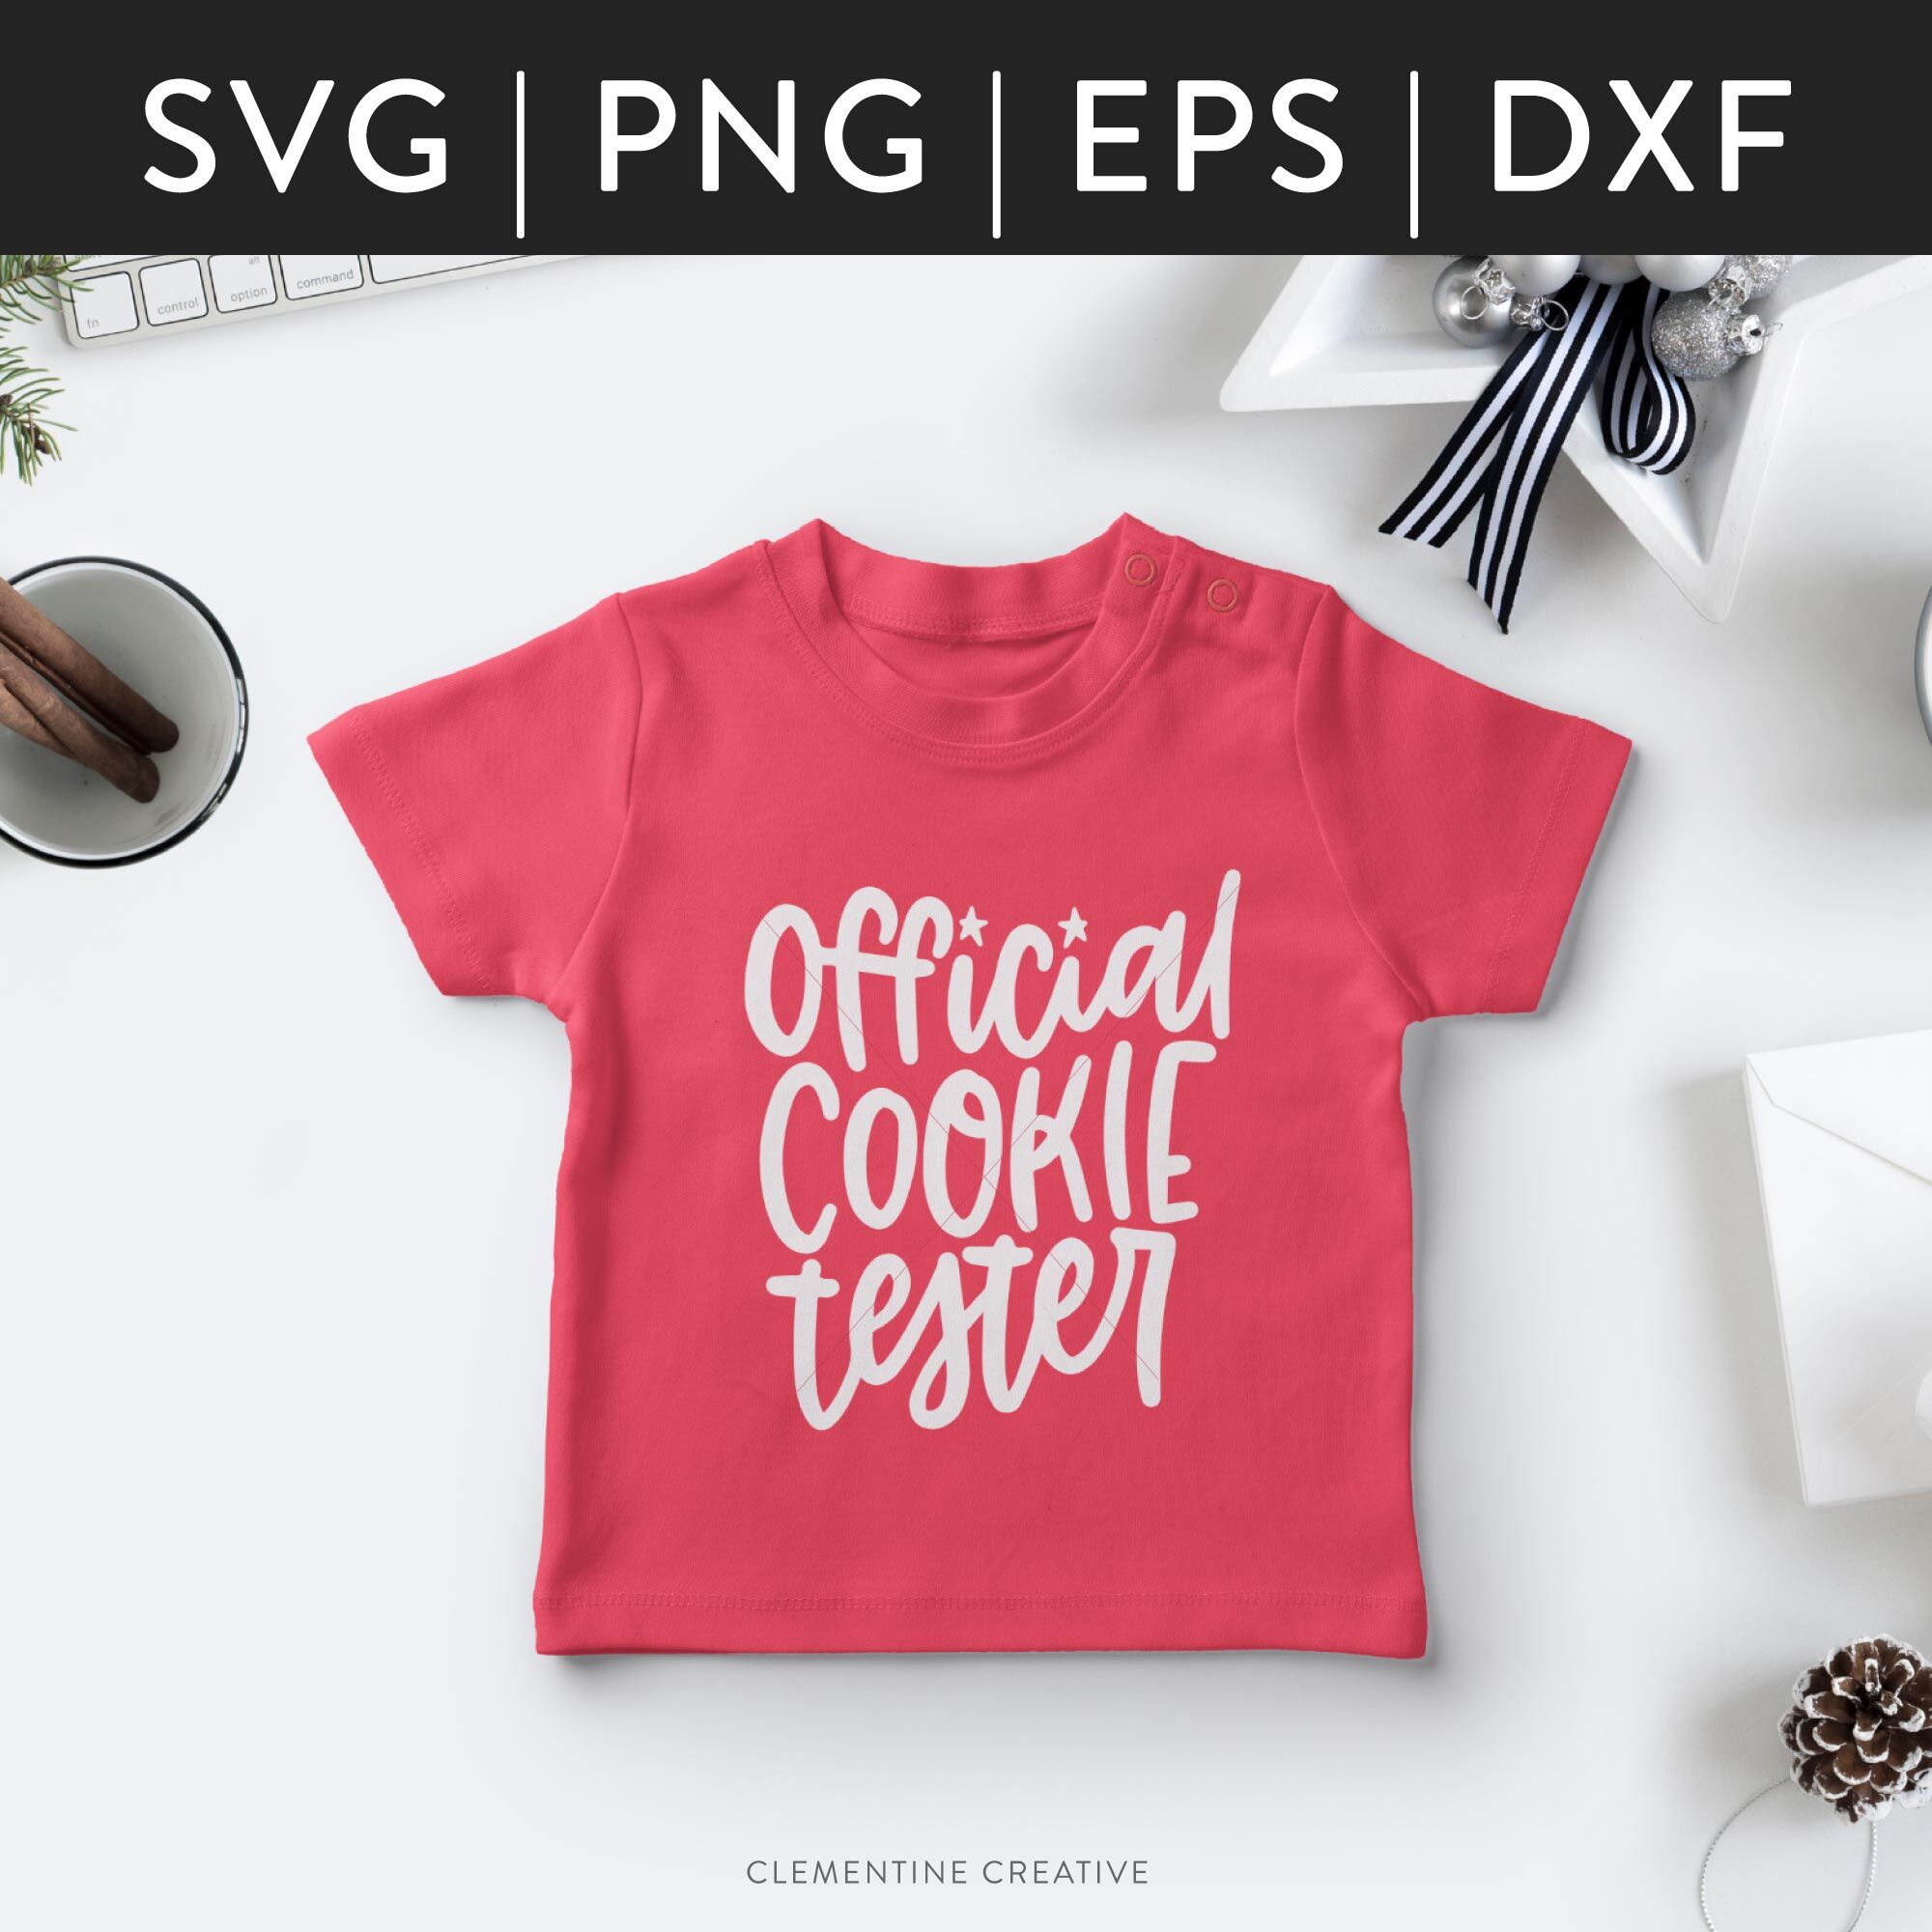 Christmas Shirt Svg Official Cookie Tester Svg Christmas Baking Sv By Clementine Creative Thehungryjpeg Com